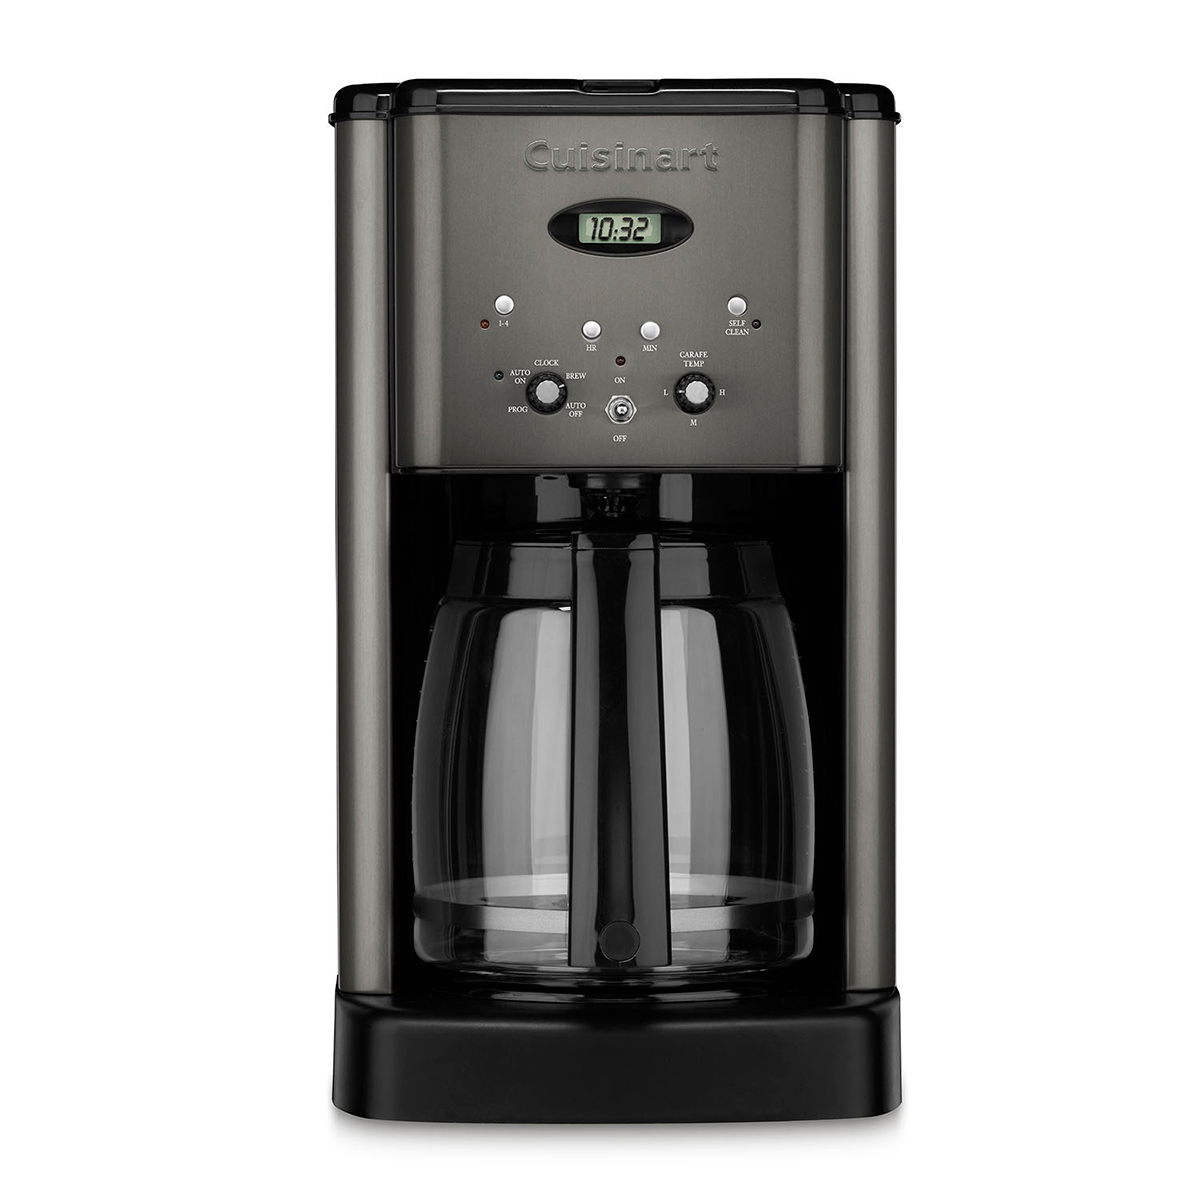 Cuisinart(R) Brew Central(tm) 12 Cup Programmable Coffee Maker